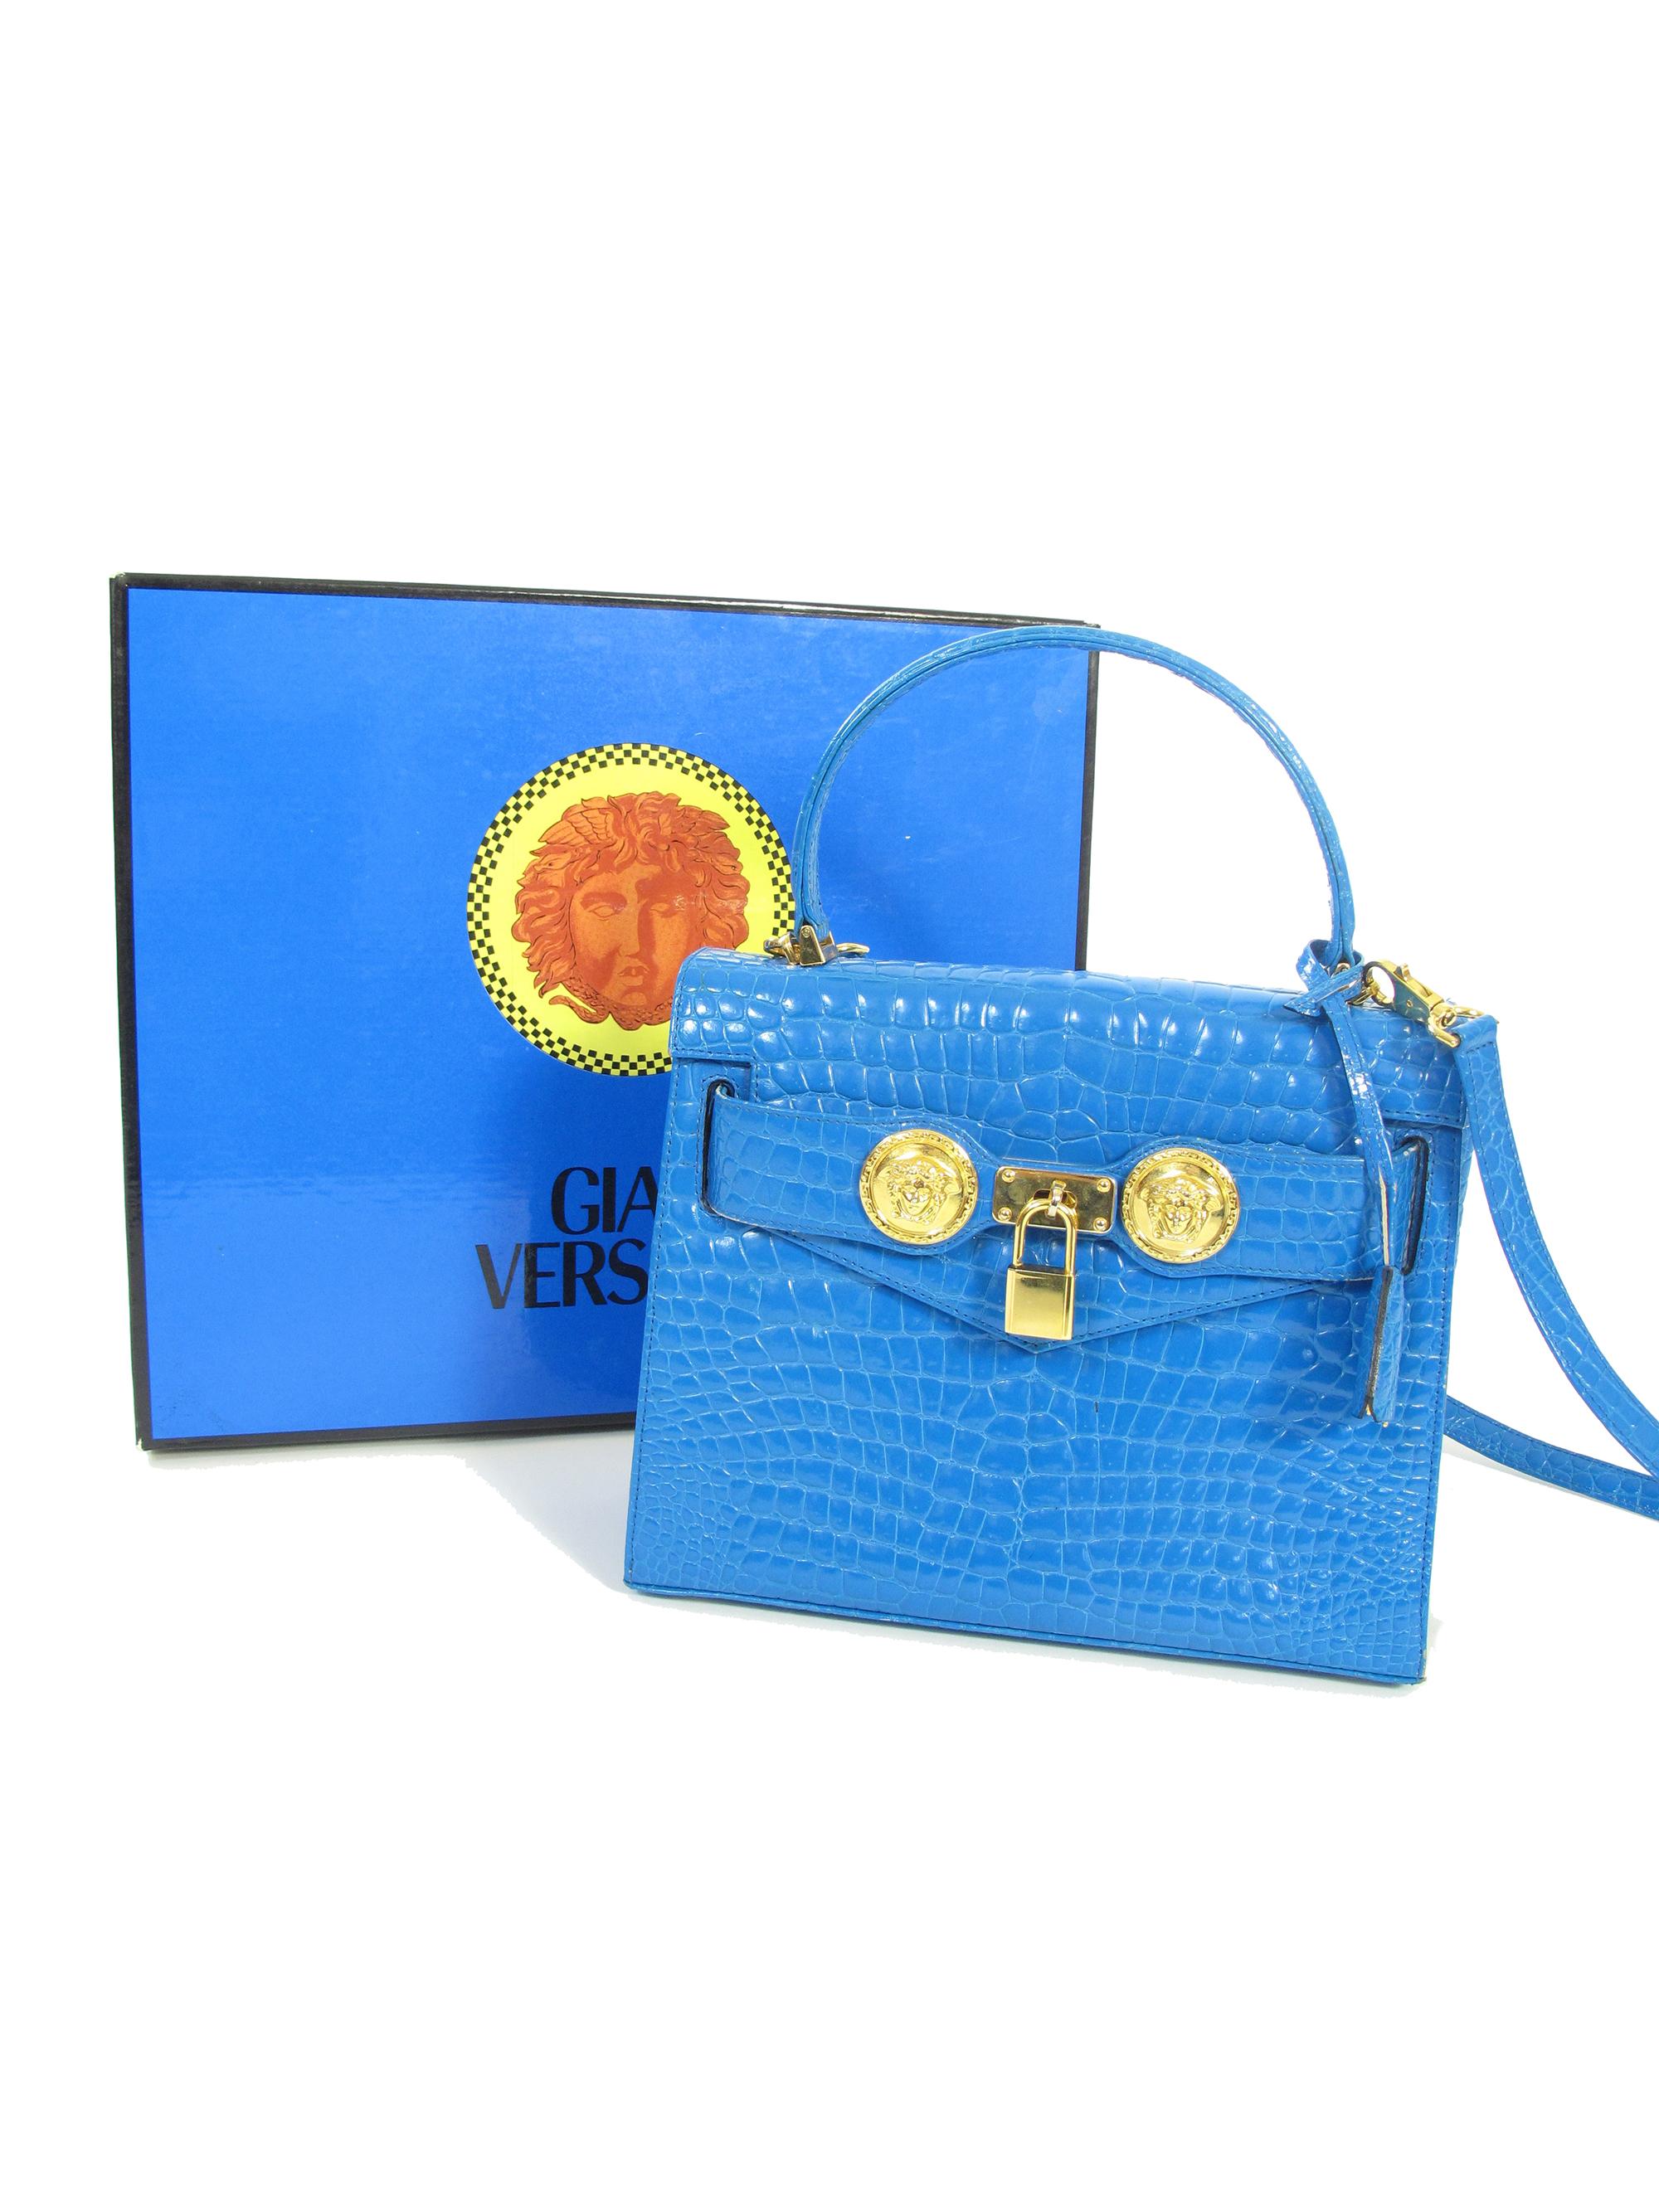 Gianni Versace blue croc embossed kelly mini bag from 1997. Condition Very good, minimal wear. With original box. From last Gianni Versace collection. 

 